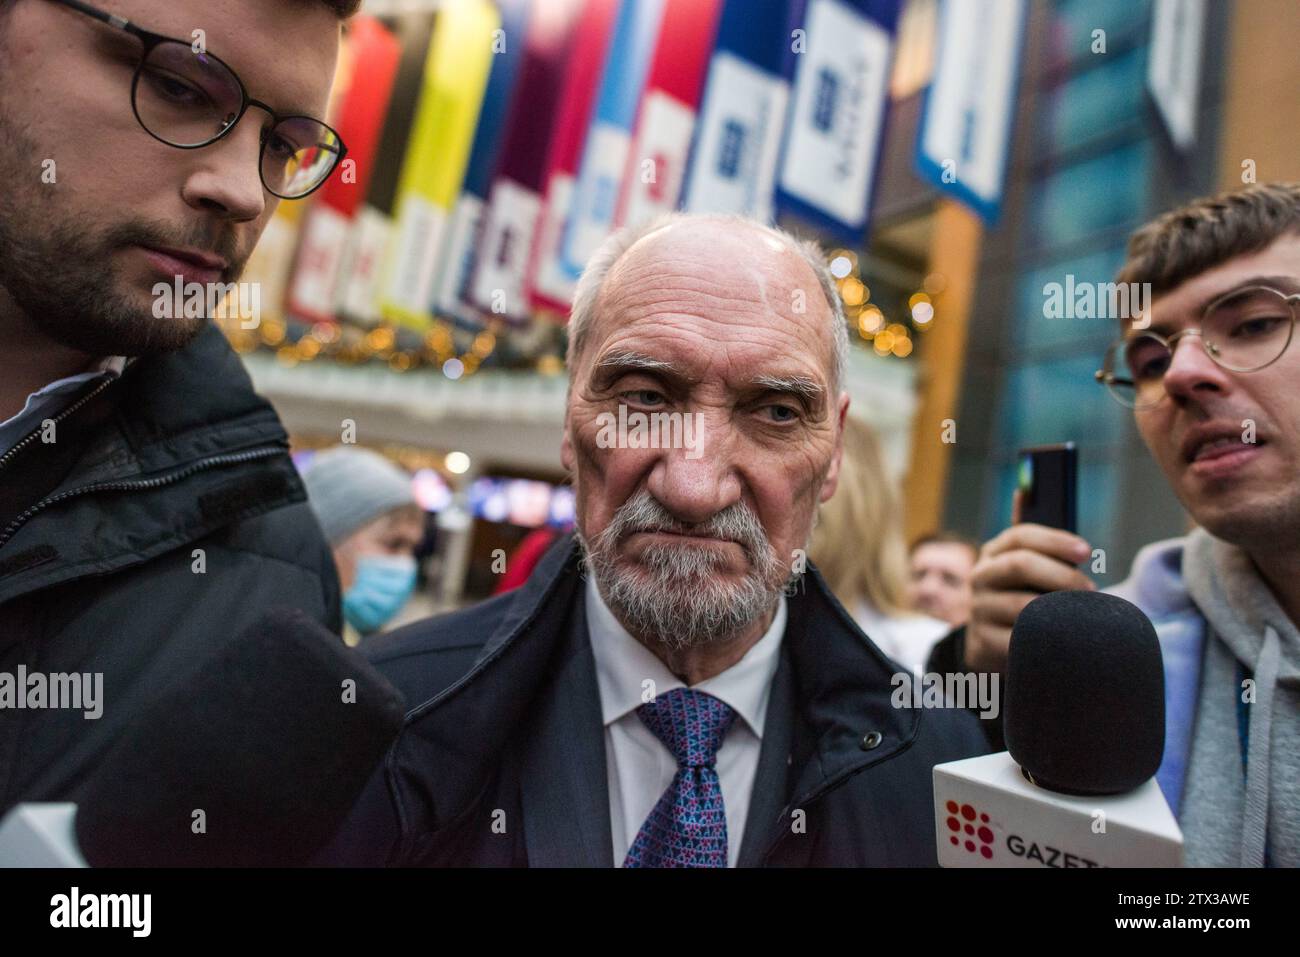 Antoni Macierewicz, member of parliament and the Law and Justice party (PiS) speaks to the press during a sit-in protest at the headquarters of TVP state TV. Poland's new pro-European Union government said Wednesday that it had changed the directors of state television in Poland known as TVP, radio and the government-run news agency as it embarked on the path of freeing publicly-owned media from the political control of the previous nationalist conservative administration. The Cabinet of Prime Minister Donald Tusk, which took office last week, has made it a priority to restore objectivity and Stock Photo